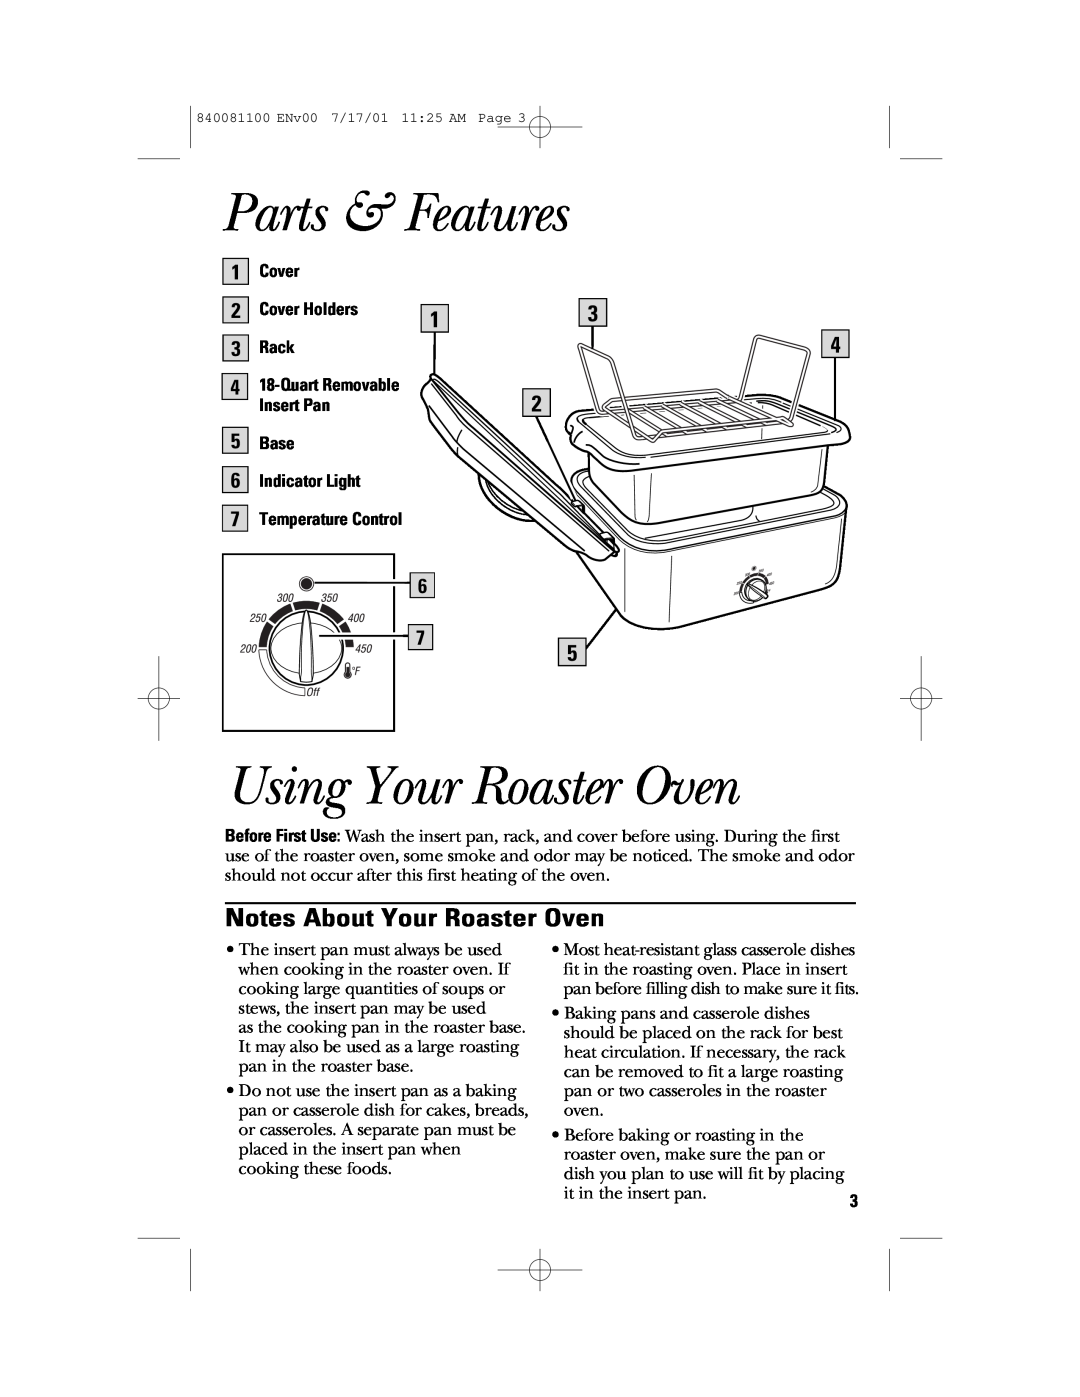 GE 840081100 manual Parts & Features, Using Your Roaster Oven, Notes About Your Roaster Oven, 1Cover, Cover Holders, Rack 